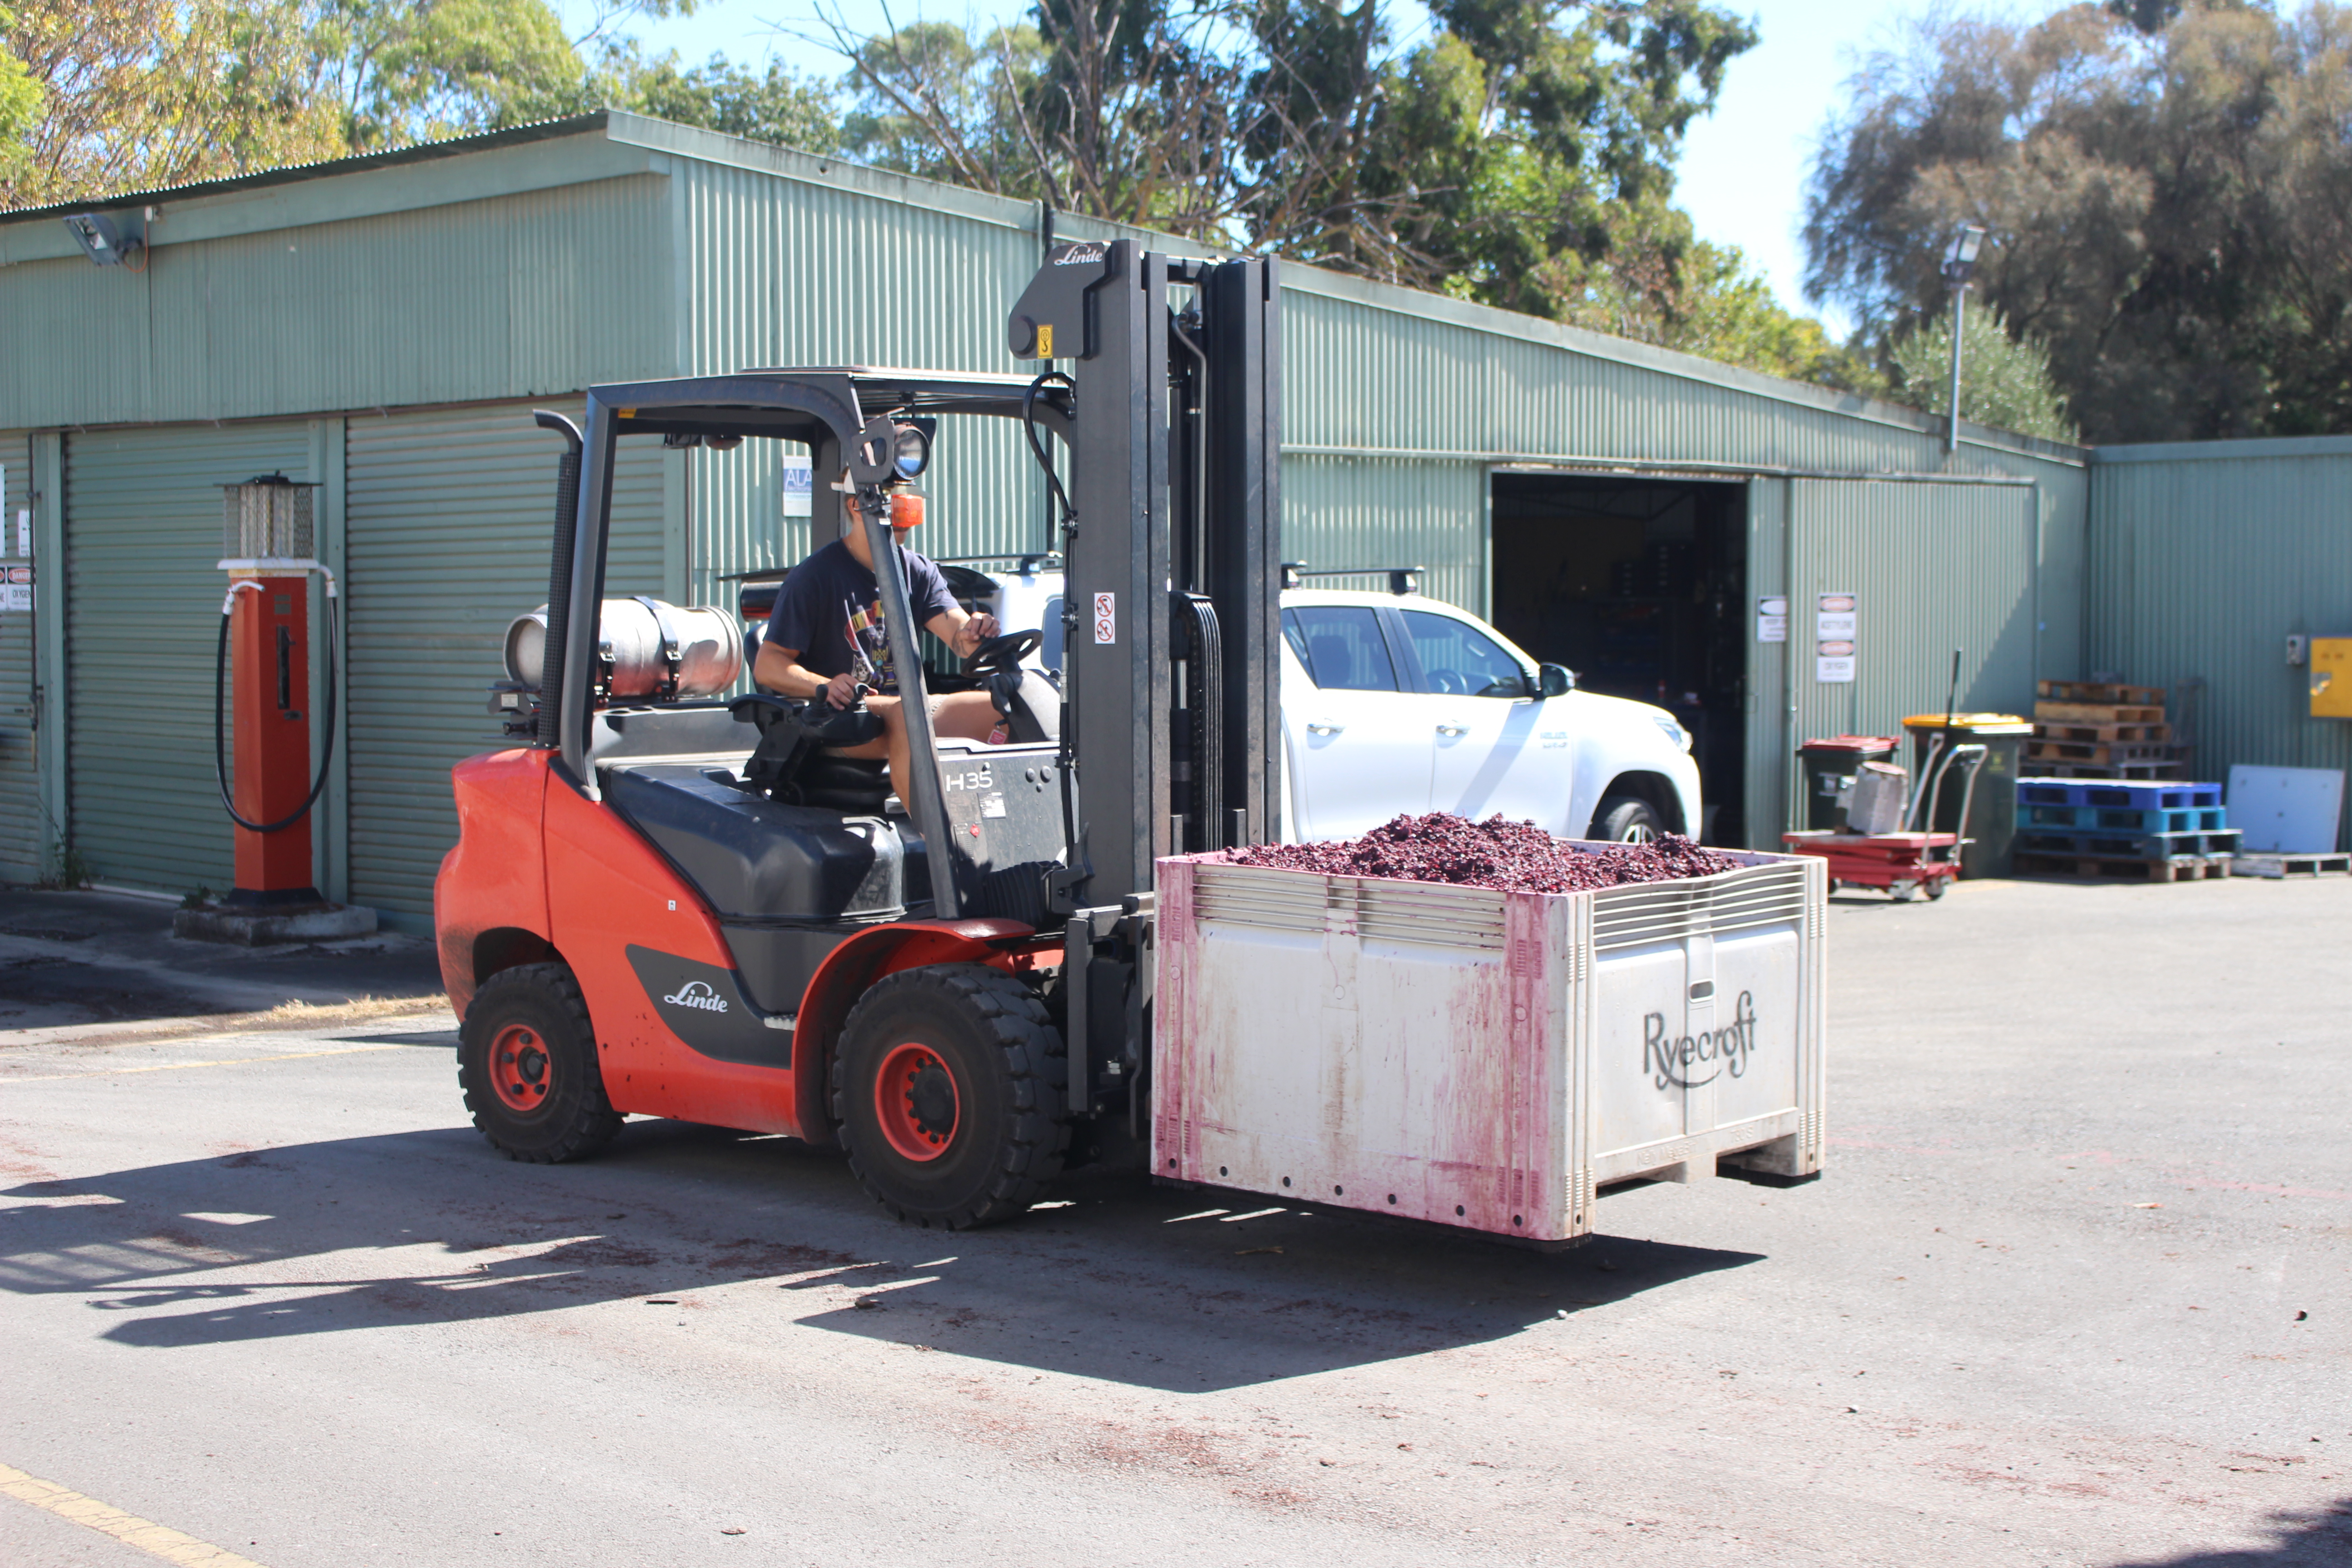 Red Linde forklift with tipping attachment transporting grapes